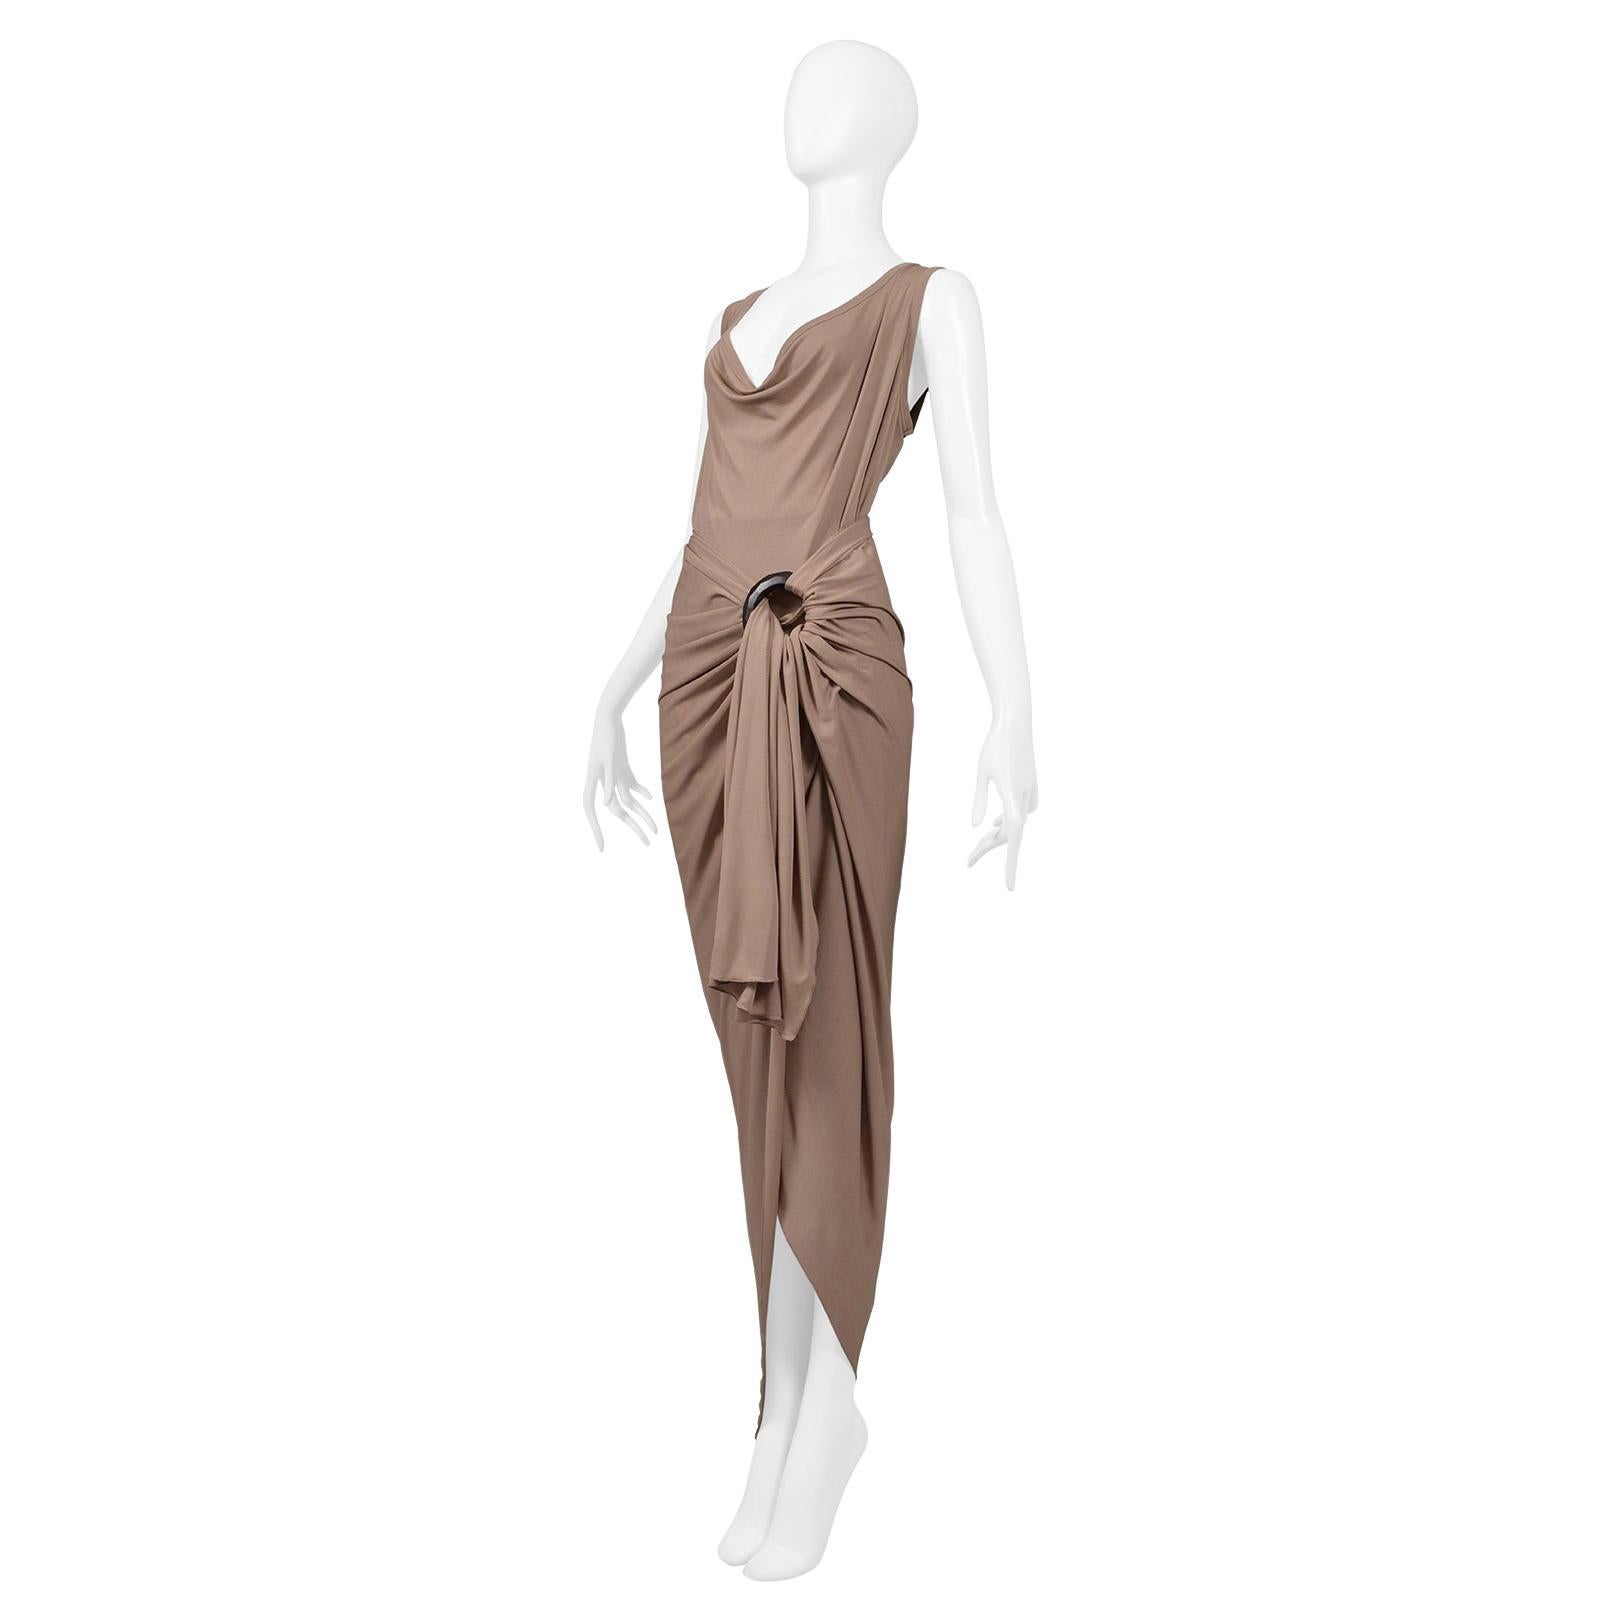 Resurrection Vintage is excited to offer a vintage Jean Paul Gaultier draped skirt and top ensemble. The skirt features gathered fabric at right hip with an invisible zipper, a large dark brown wooden bangle wrapped up at right hip, and an